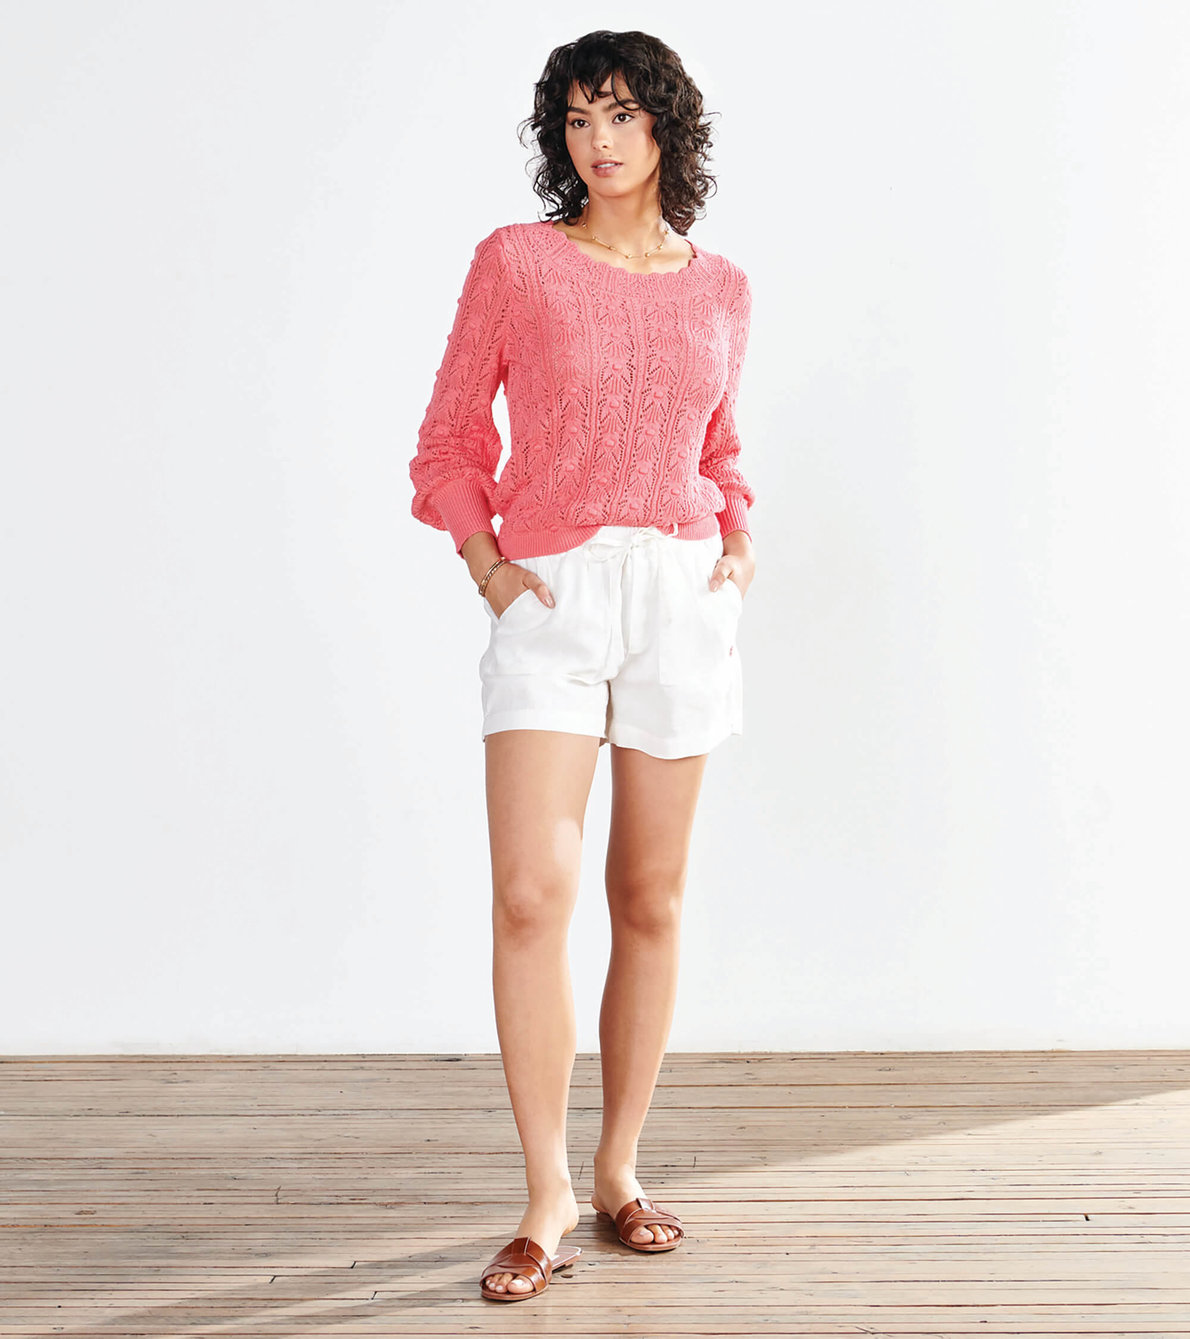 View larger image of Floral Pointelle Sweater - Coral Strawberry